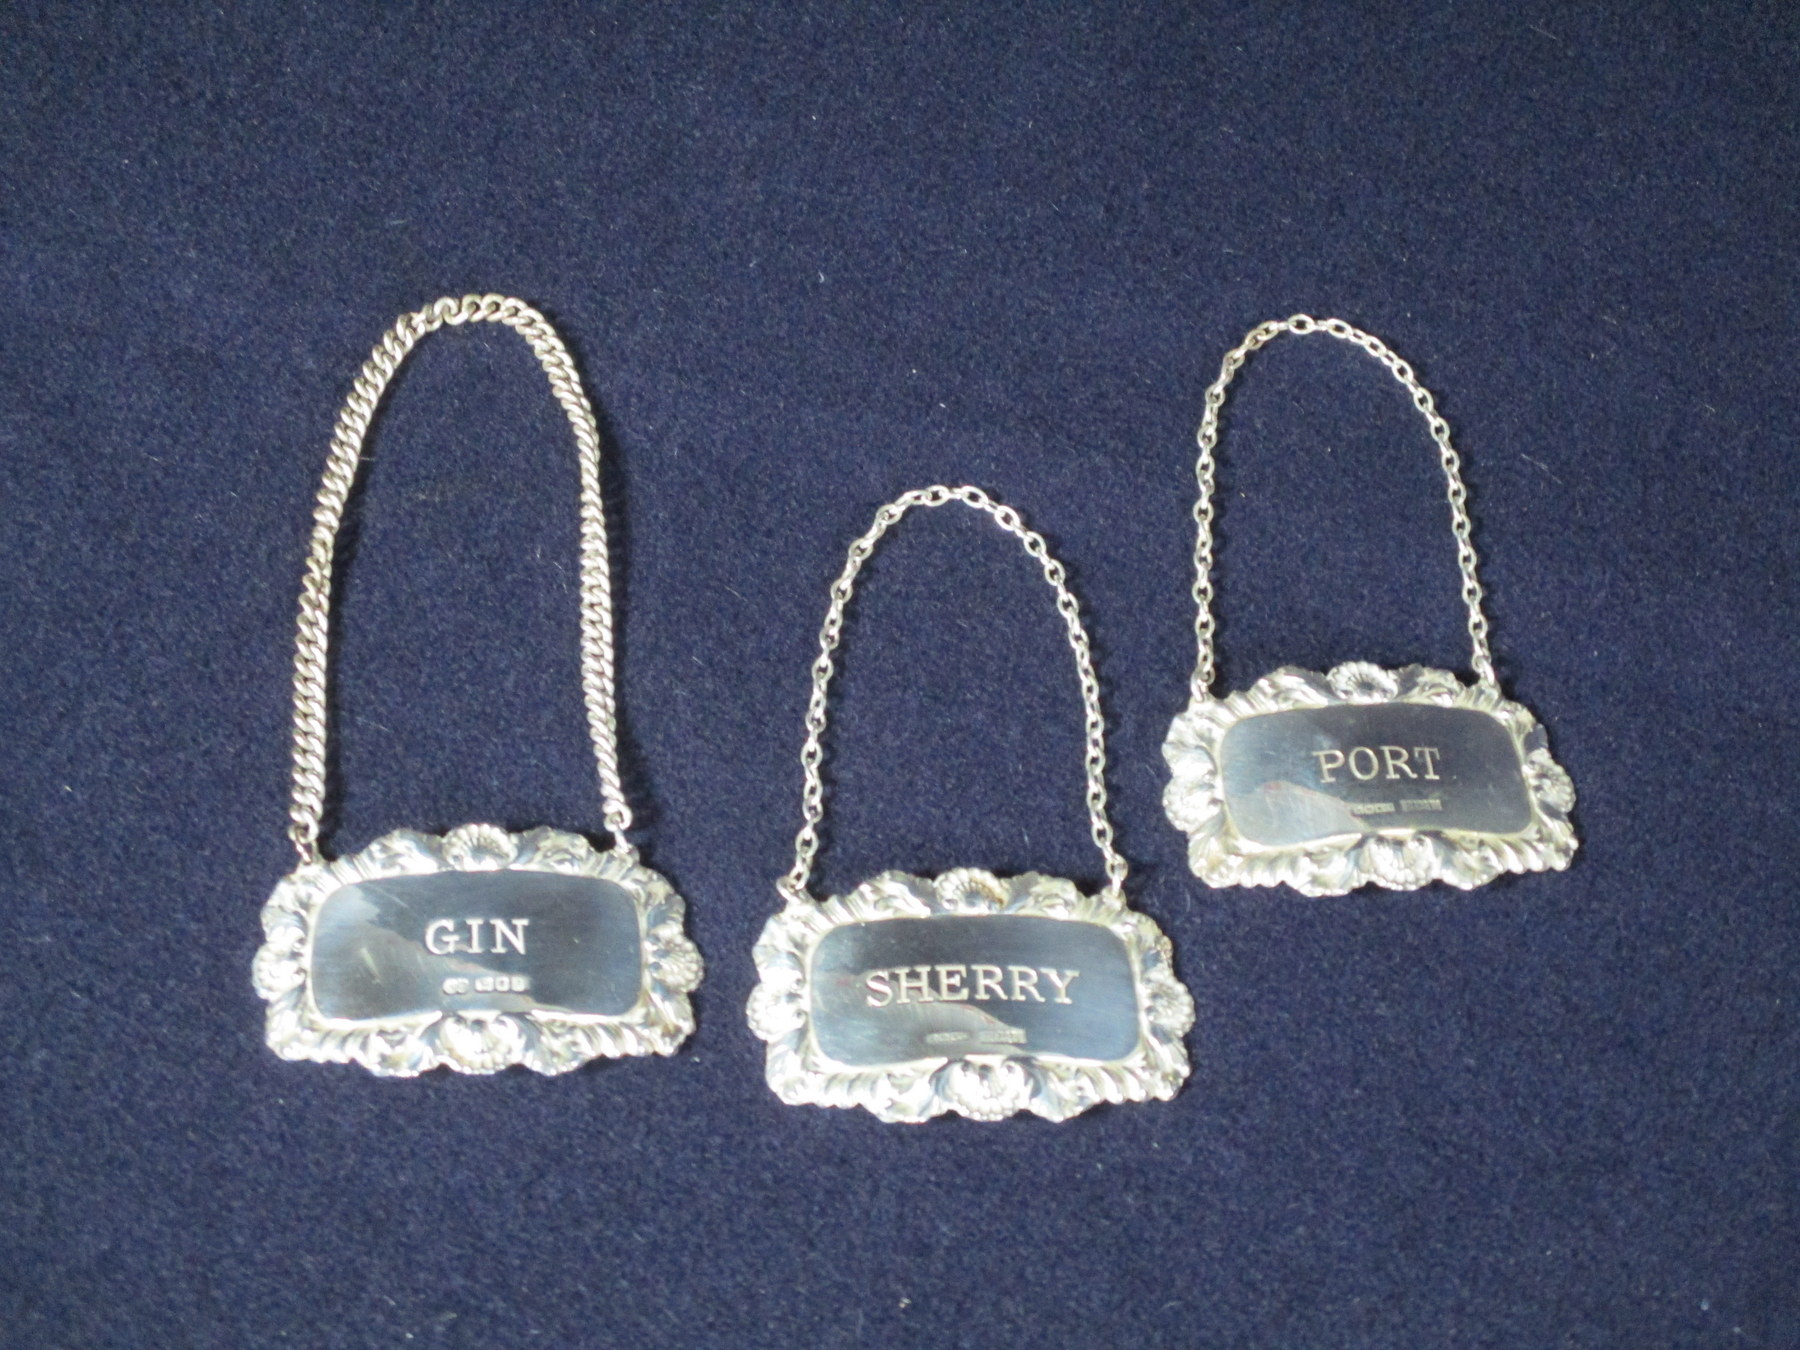 Three Silver Decanter Labels :- Gin London 1963 - N° 2 Port Birmingham 1970 - A.M. and Co Sherry